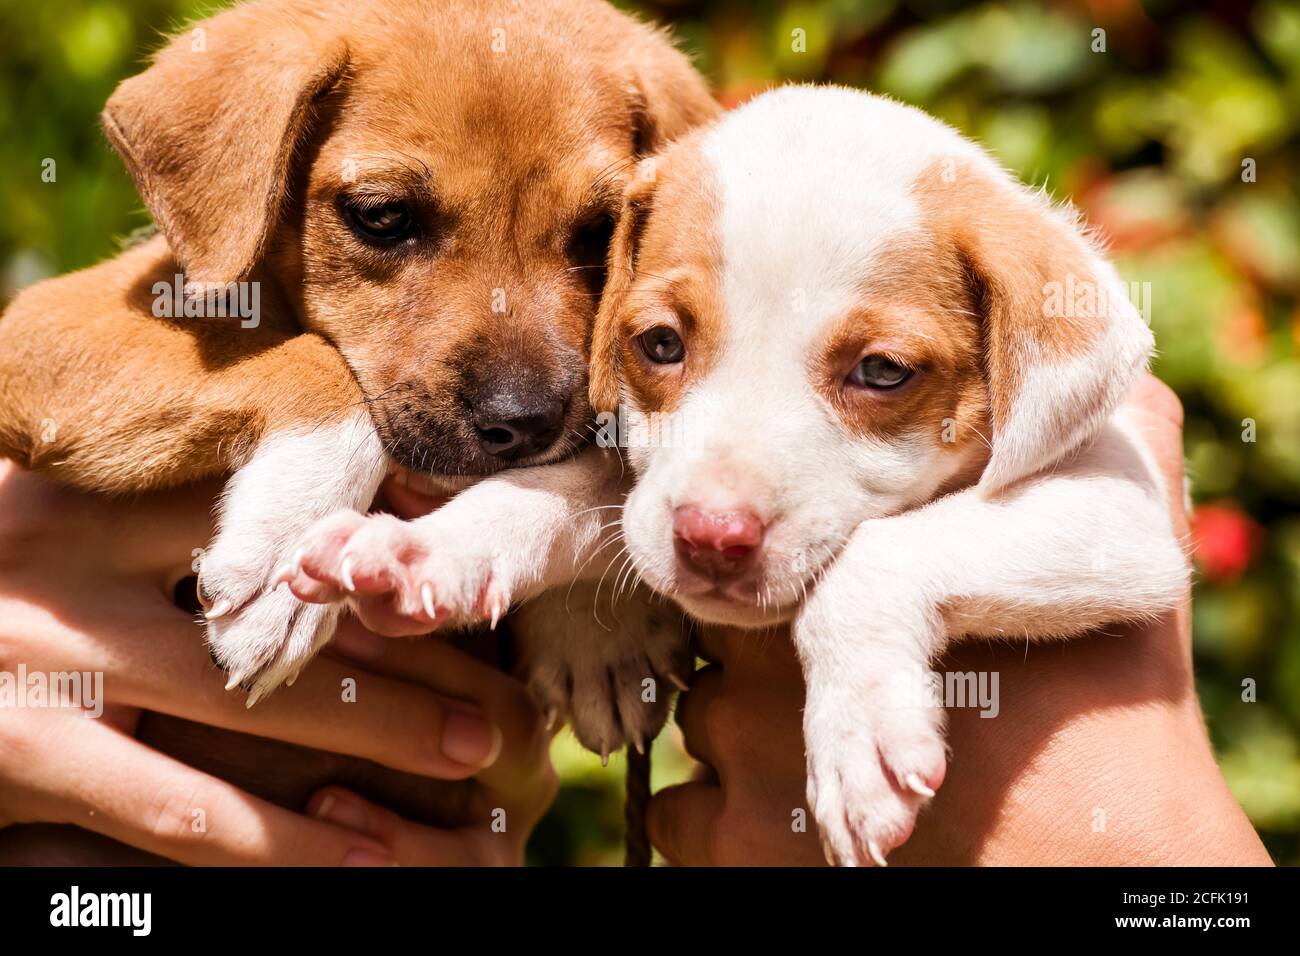 Close up photo of two little female puppies being lifted together by human hands. Stock Photo